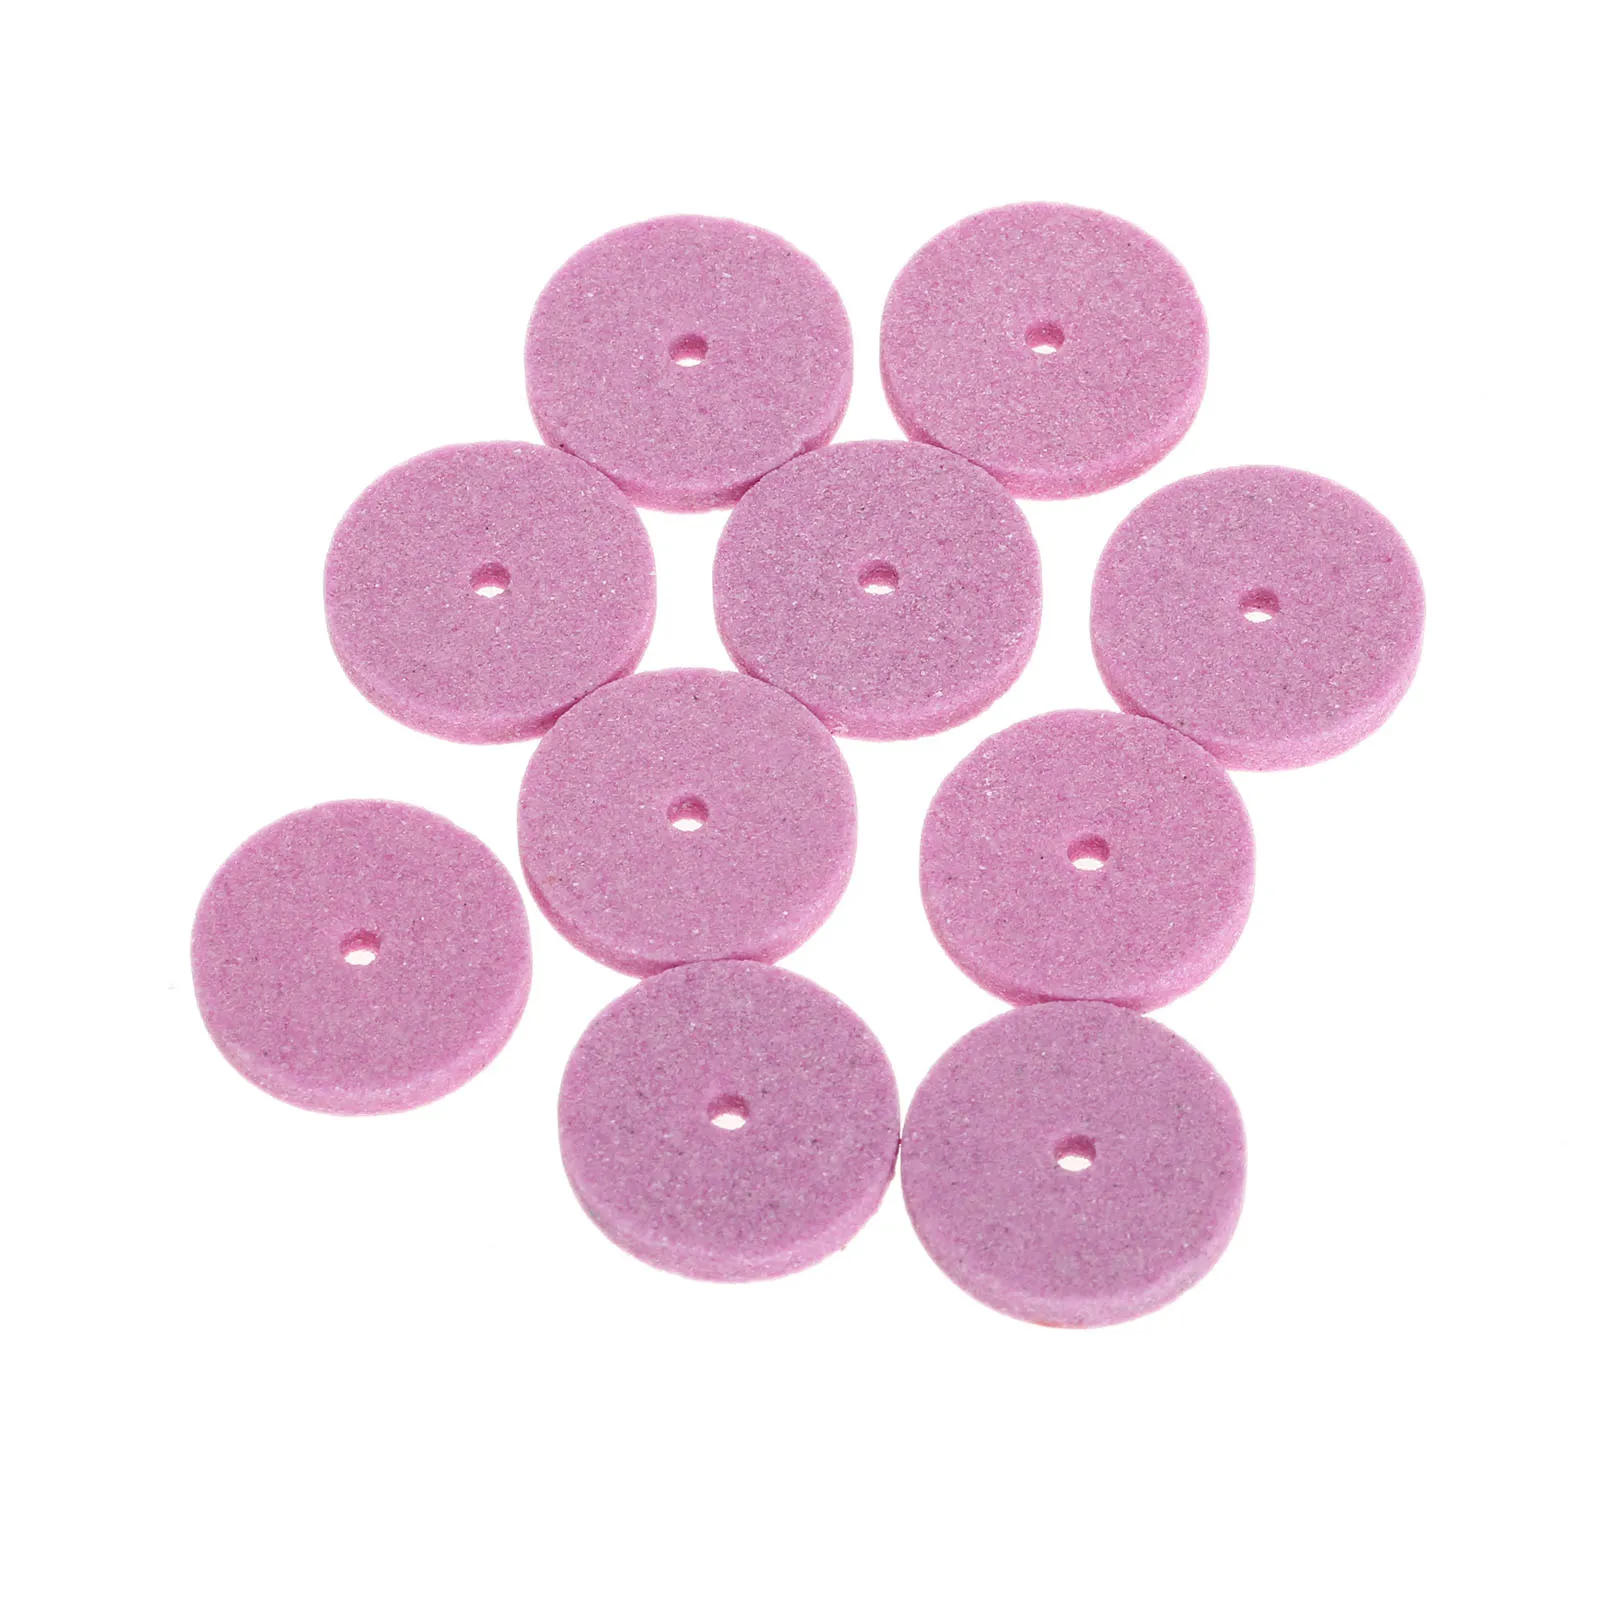 

10pcs 20mm Polishing Pad Abrasive Disc Mini Drill Grinding Wheel/Buffing Wheel For Bench Grinder Rotary Tool Dremel Accessories